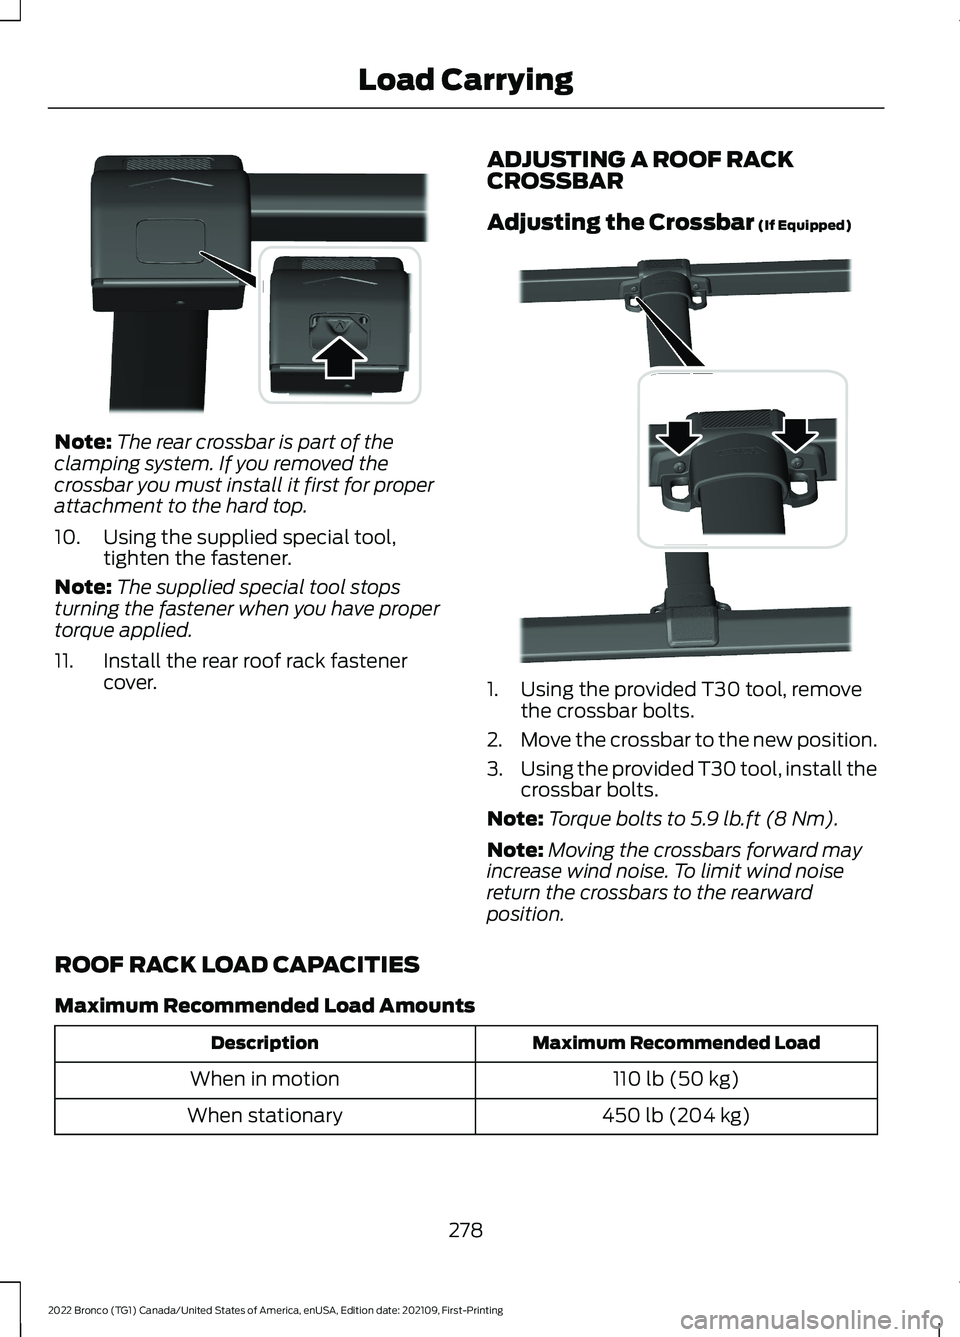 FORD BRONCO 2022  Owners Manual Note:The rear crossbar is part of theclamping system. If you removed thecrossbar you must install it first for properattachment to the hard top.
10.Using the supplied special tool,tighten the fastener